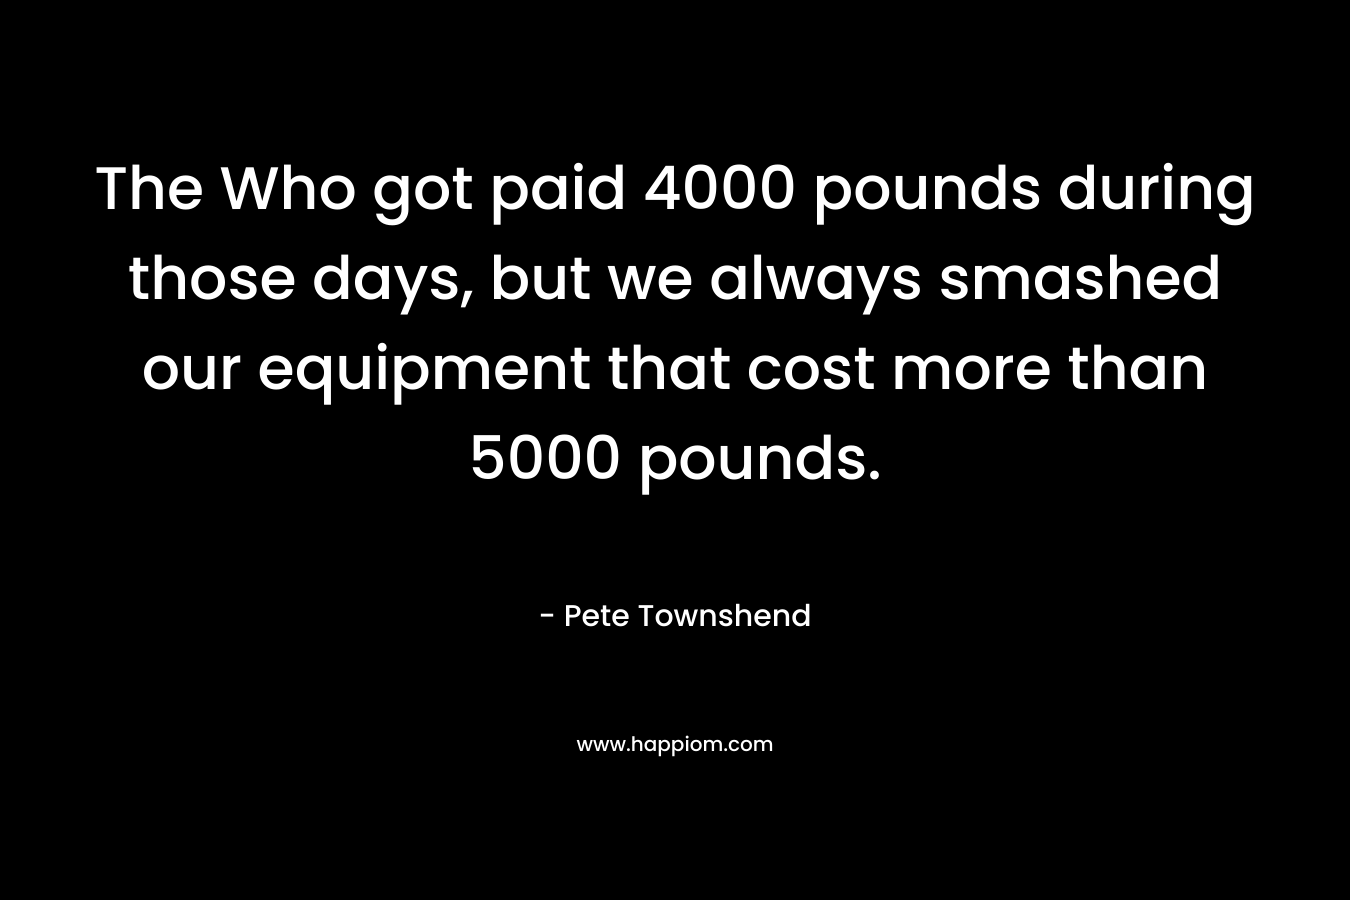 The Who got paid 4000 pounds during those days, but we always smashed our equipment that cost more than 5000 pounds. – Pete Townshend